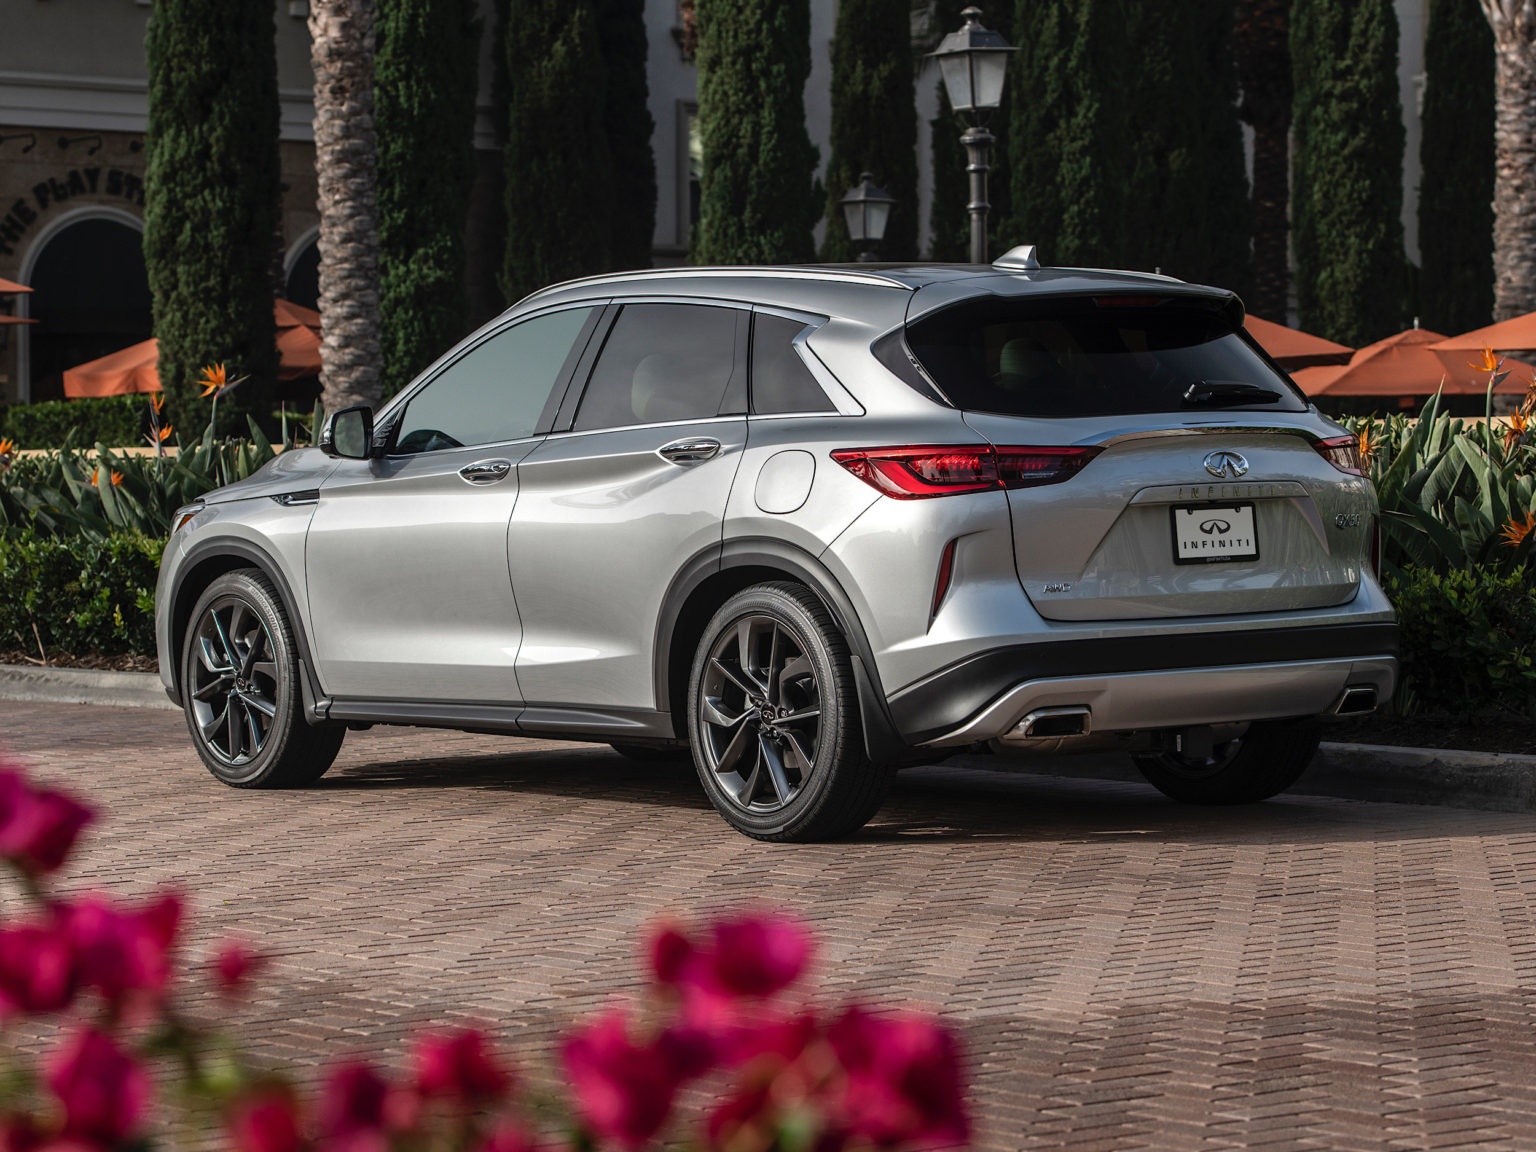 The 2021 Infiniti QX50 has received a few upgrades for the new model year.